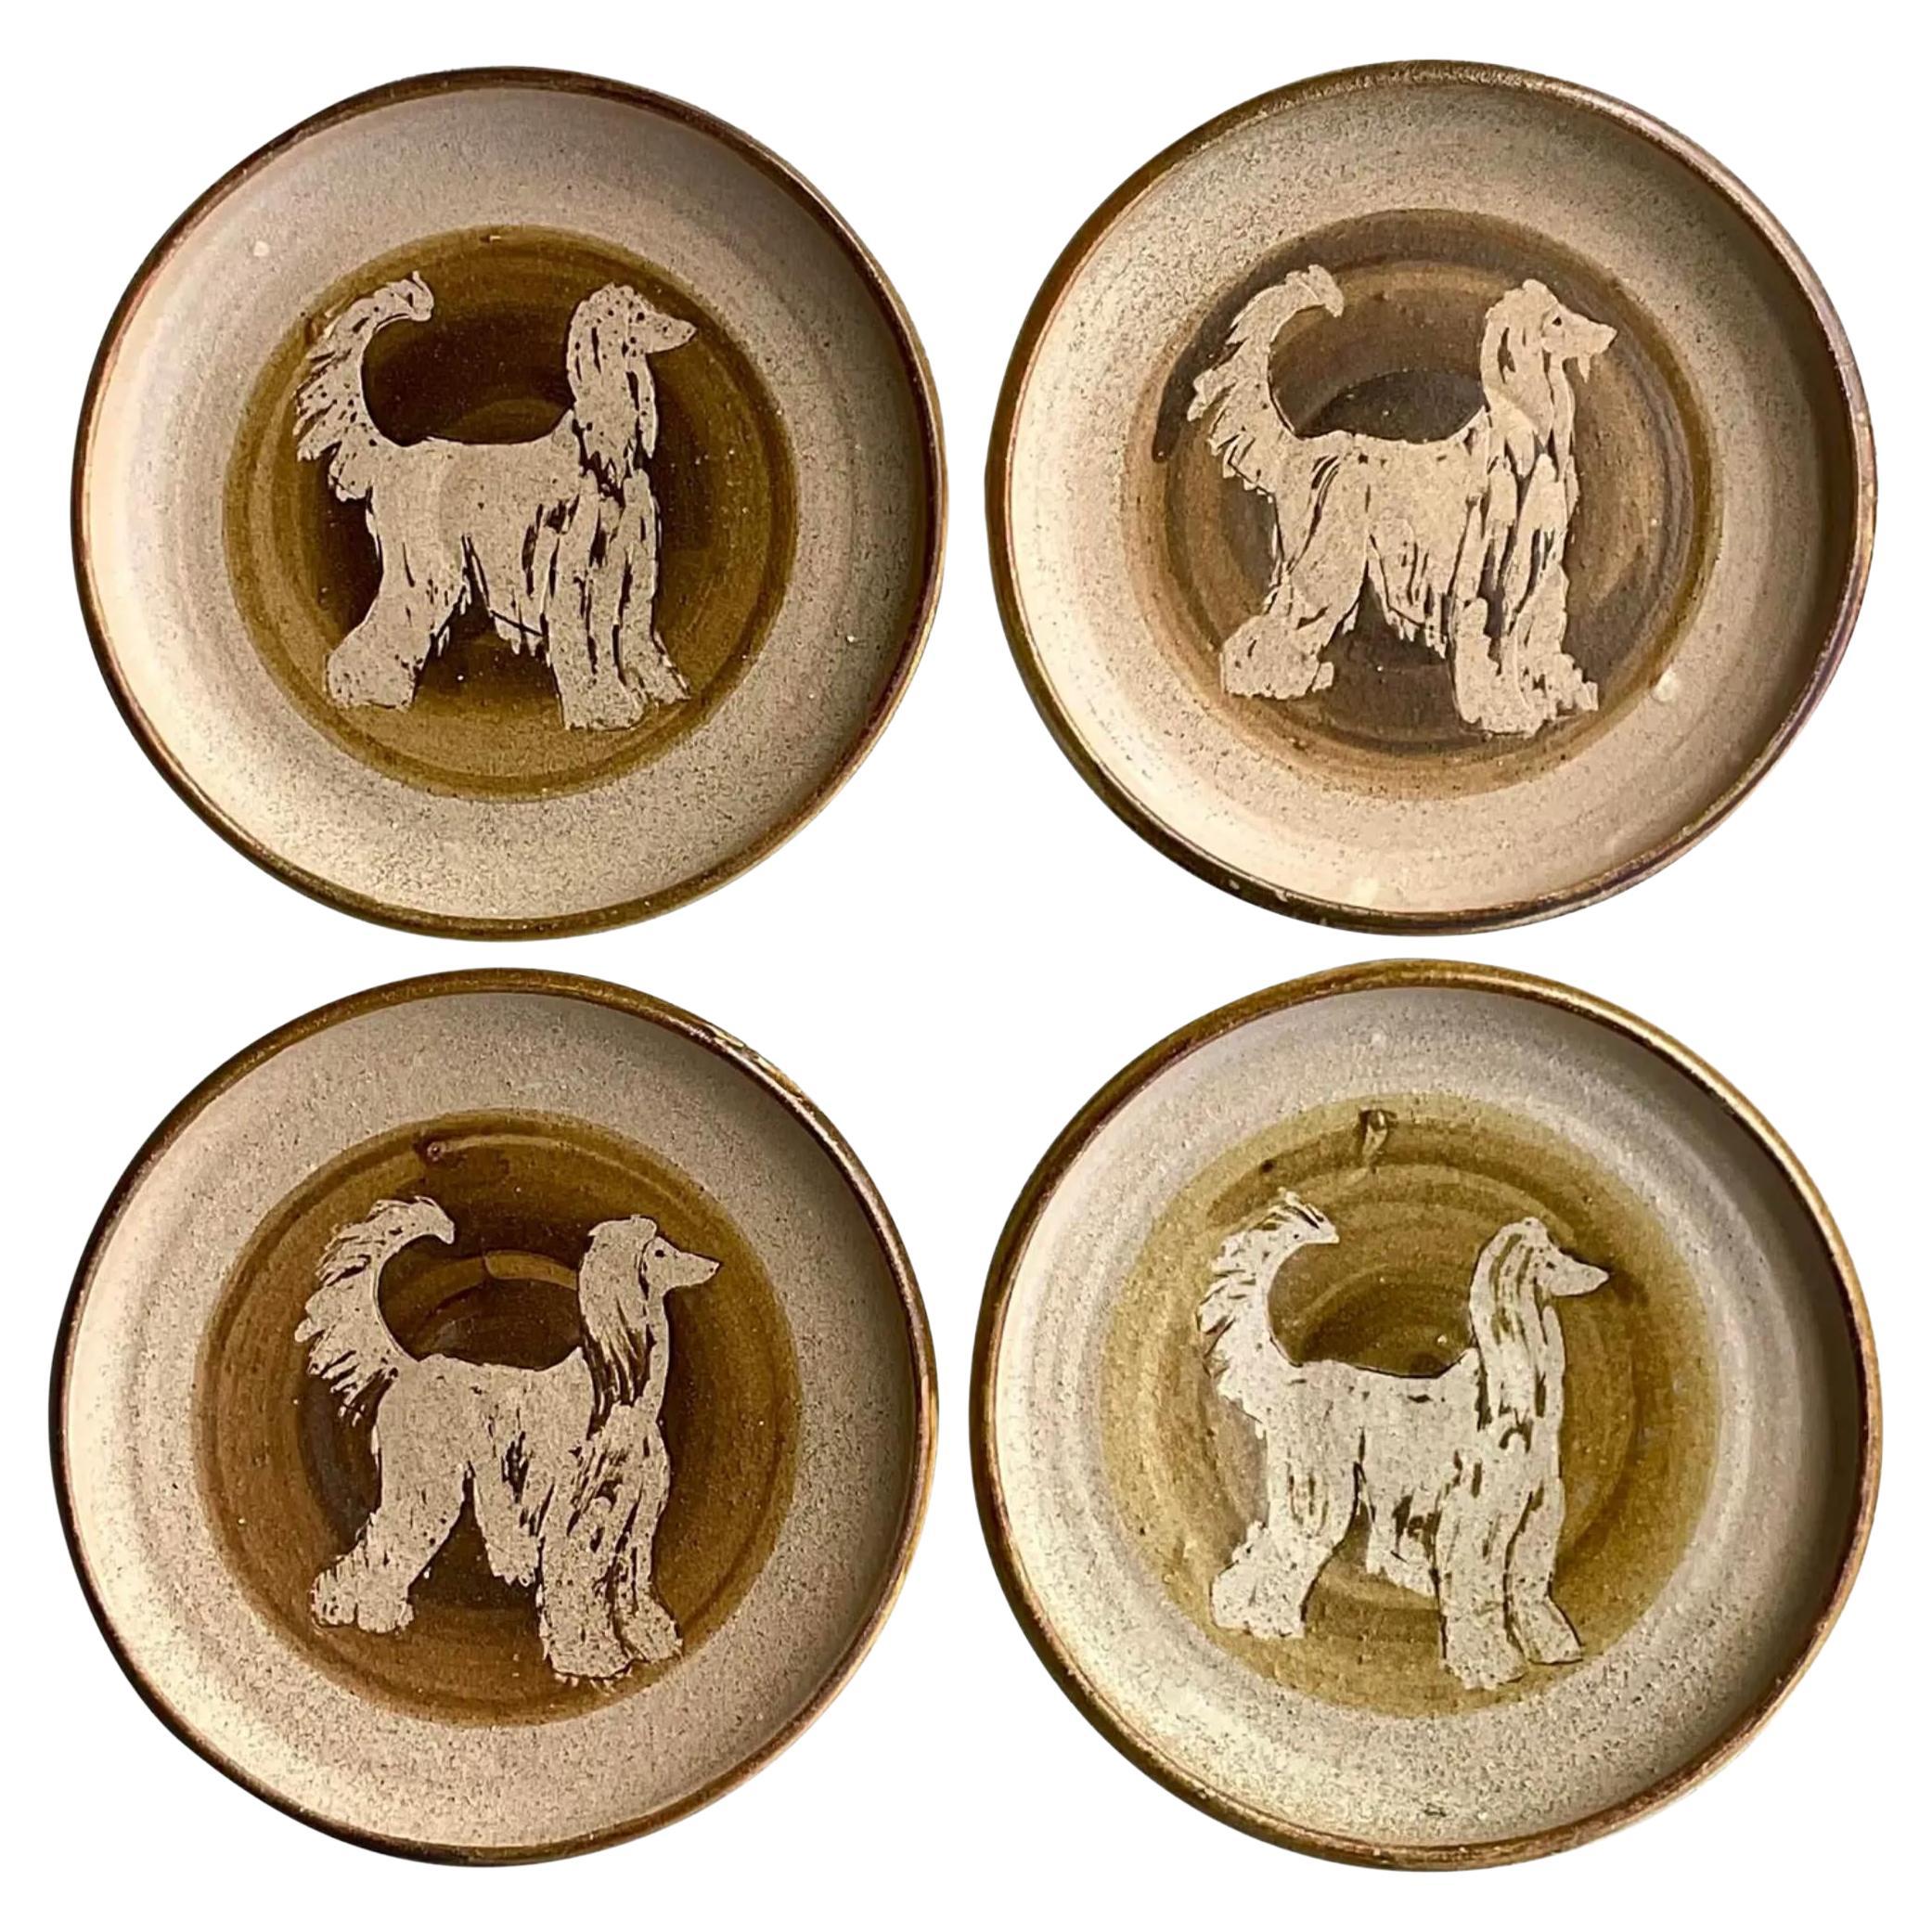 Vintage Boho Signed Studio Pottery Plates With Afghan Dogs - Set of 4 For Sale